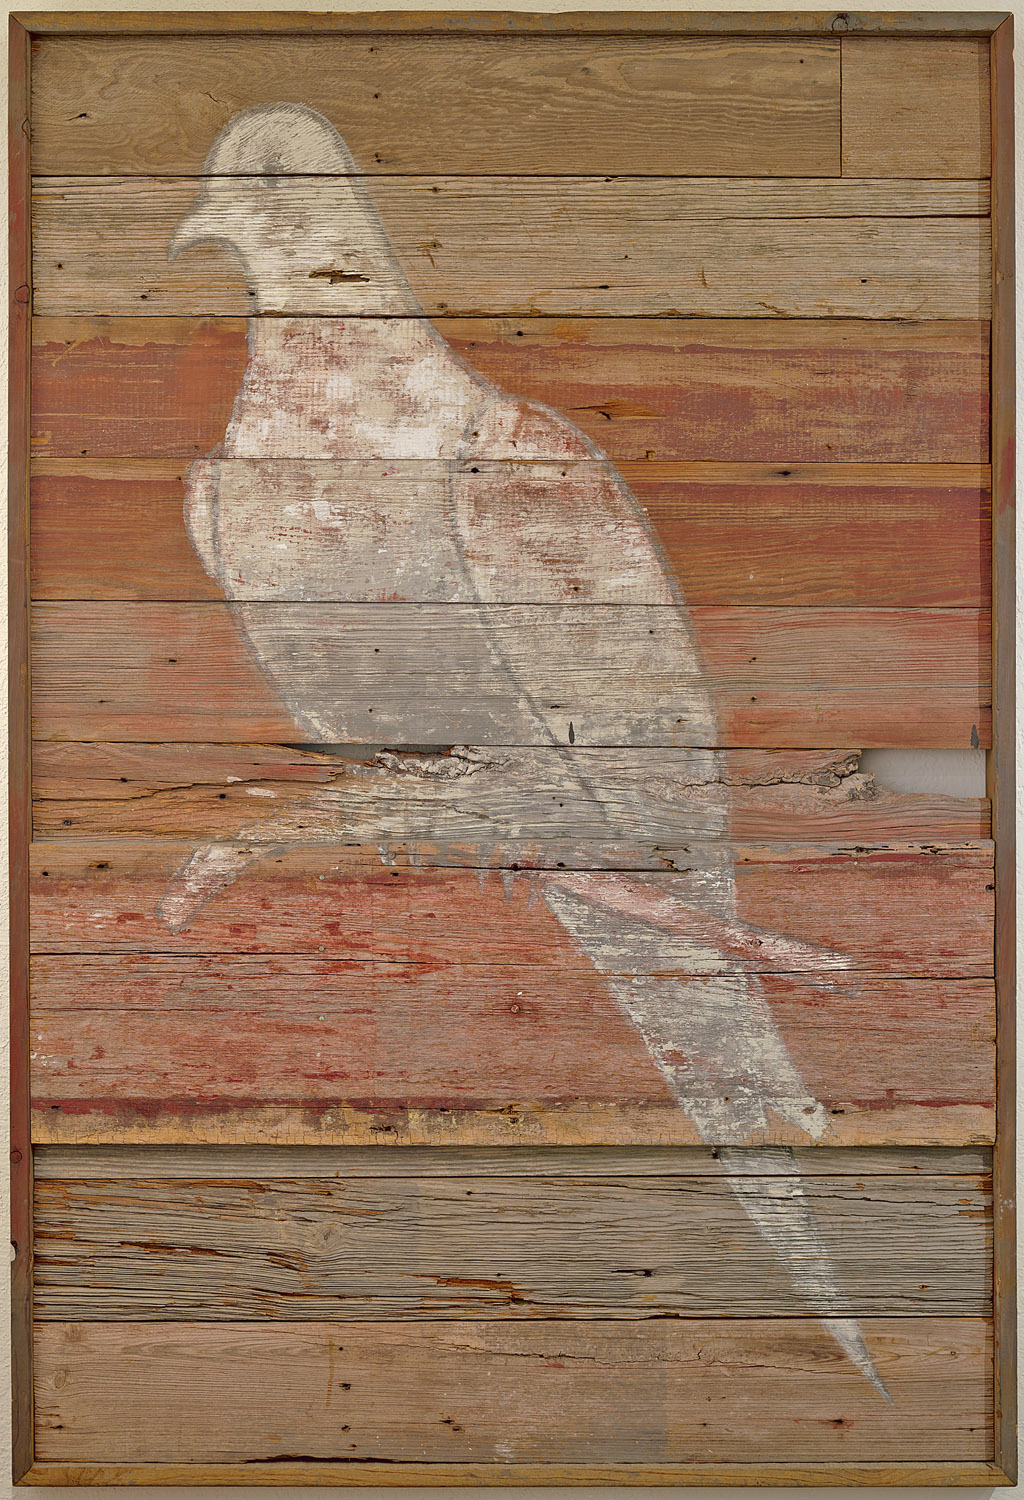 Lonesome Dove from J.J. Pumphrey General Merchandise Store, Cary White, 1987, The Wittliff Collections, Texas State University, San Marcos